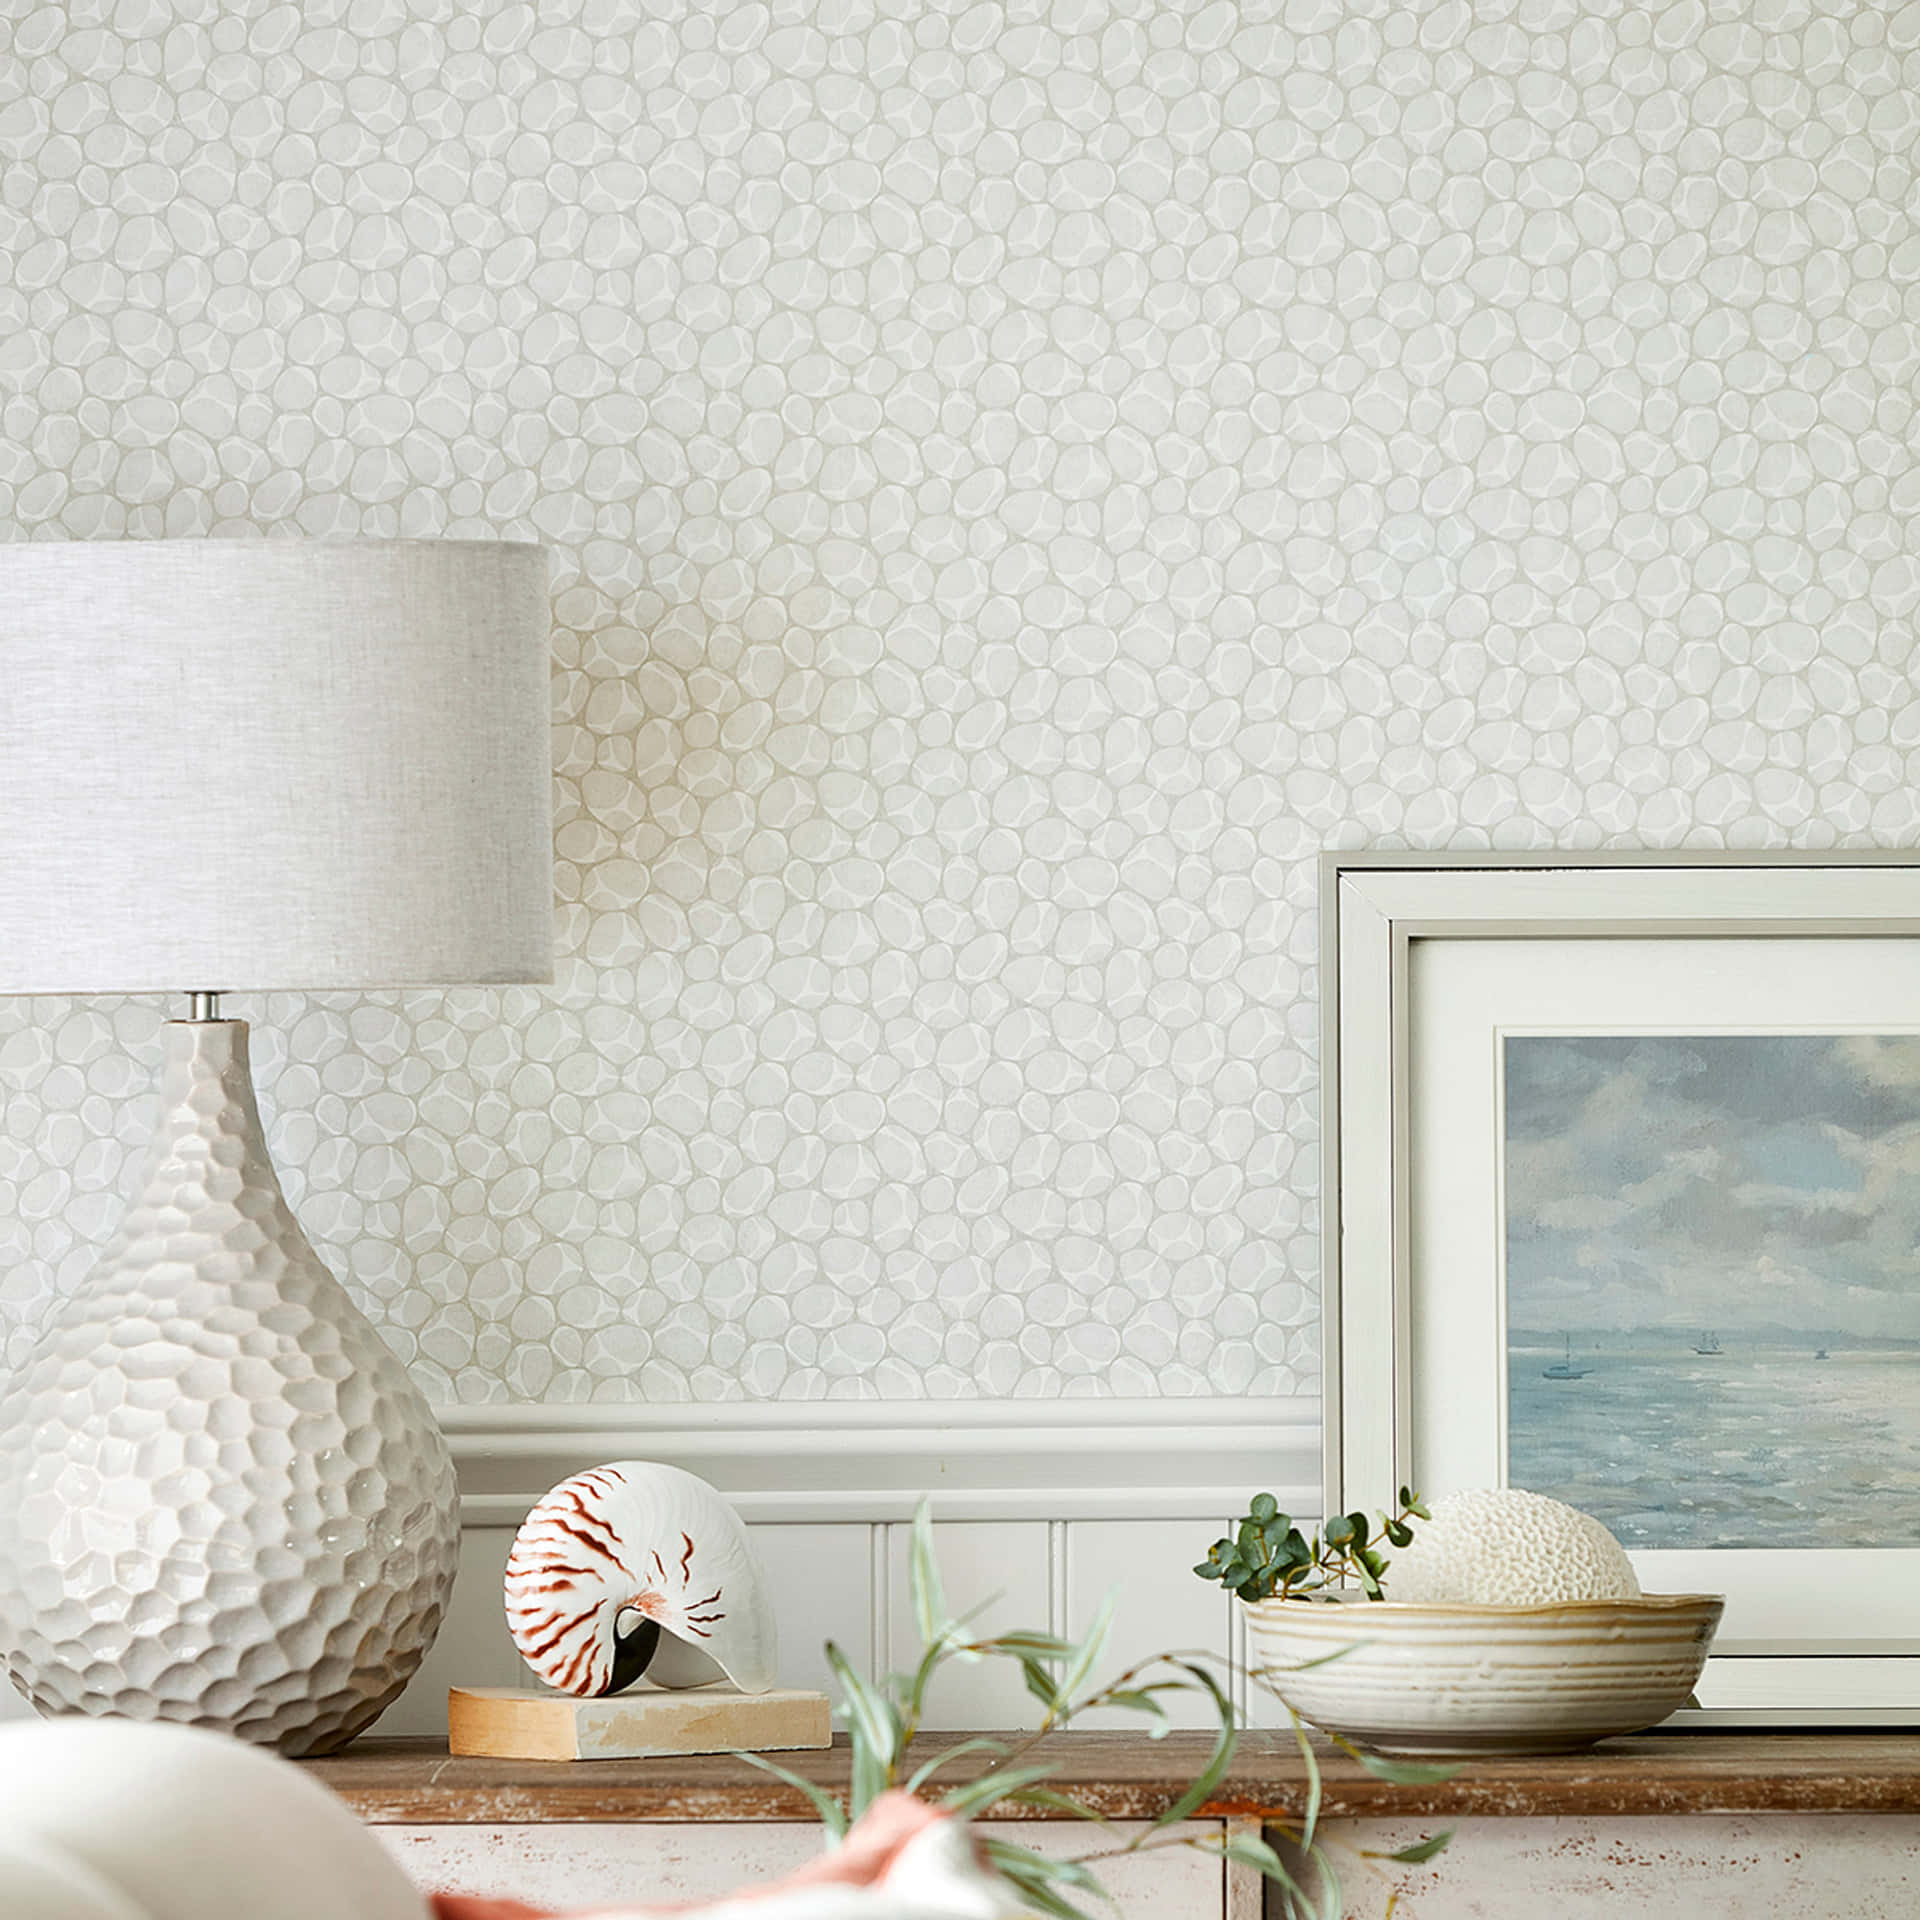 A White Wall With A White Pattern